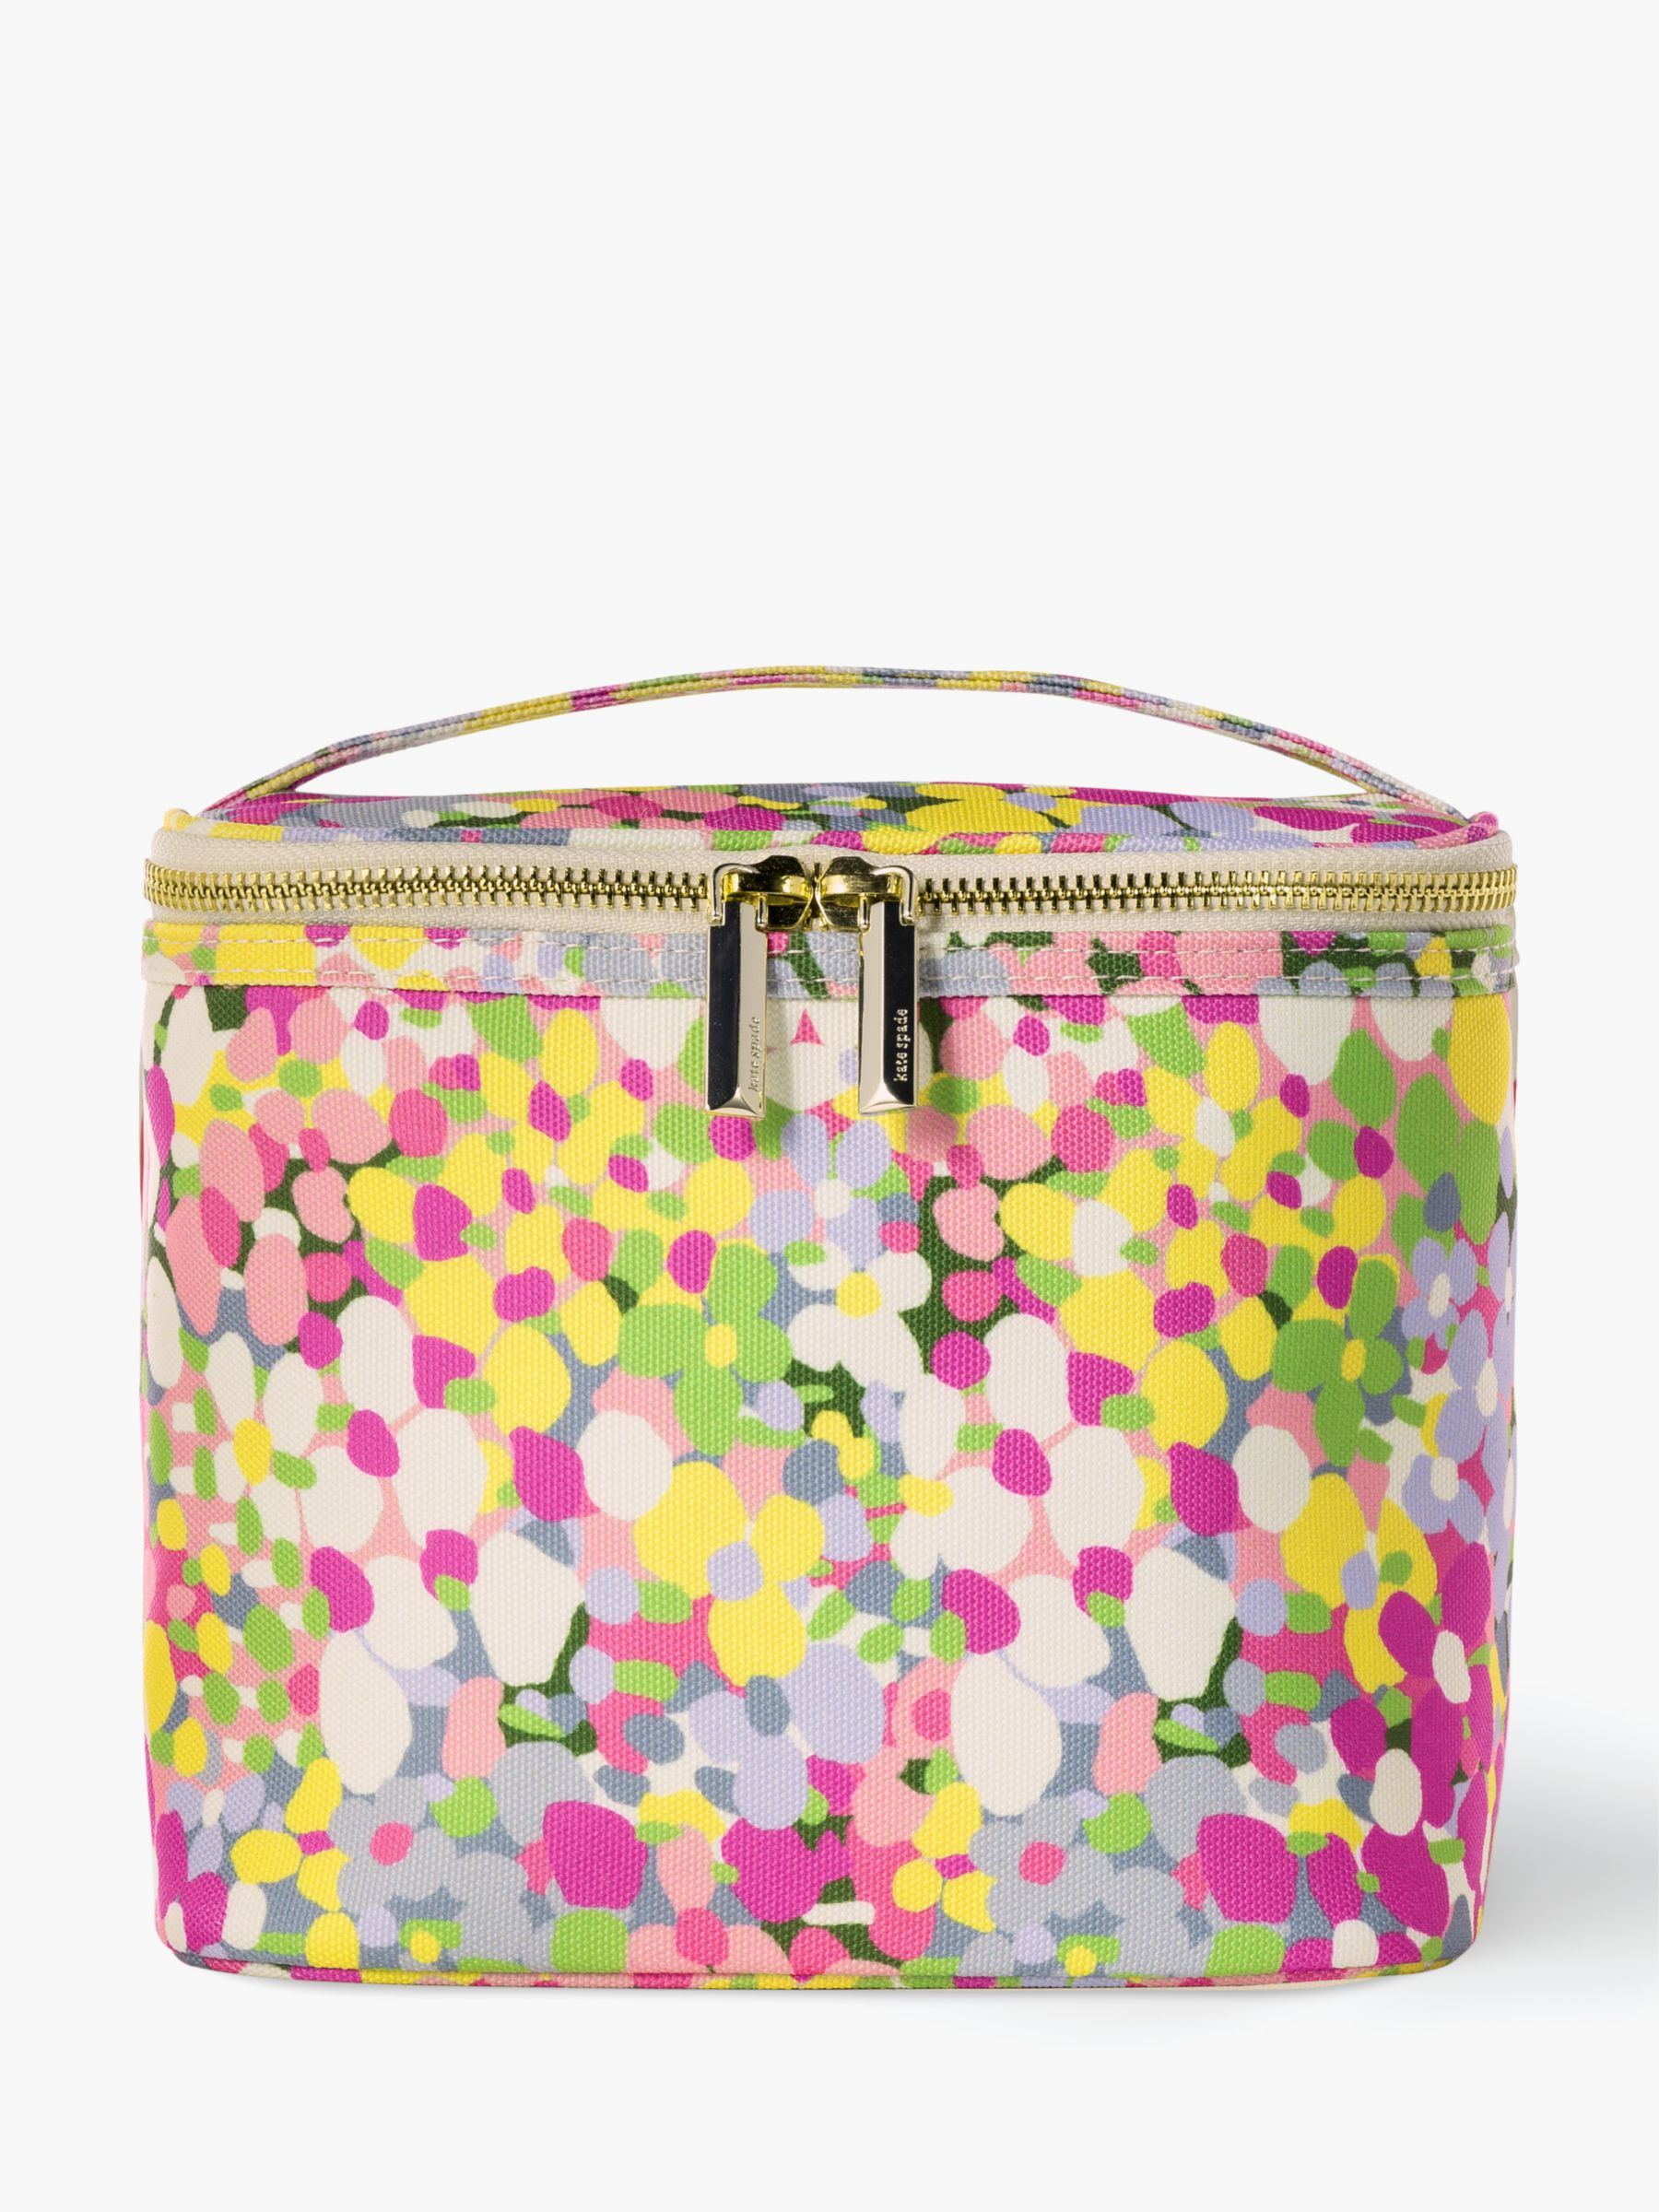 kate spade new york Floral Dot Lunch Tote Bag at John Lewis & Partners